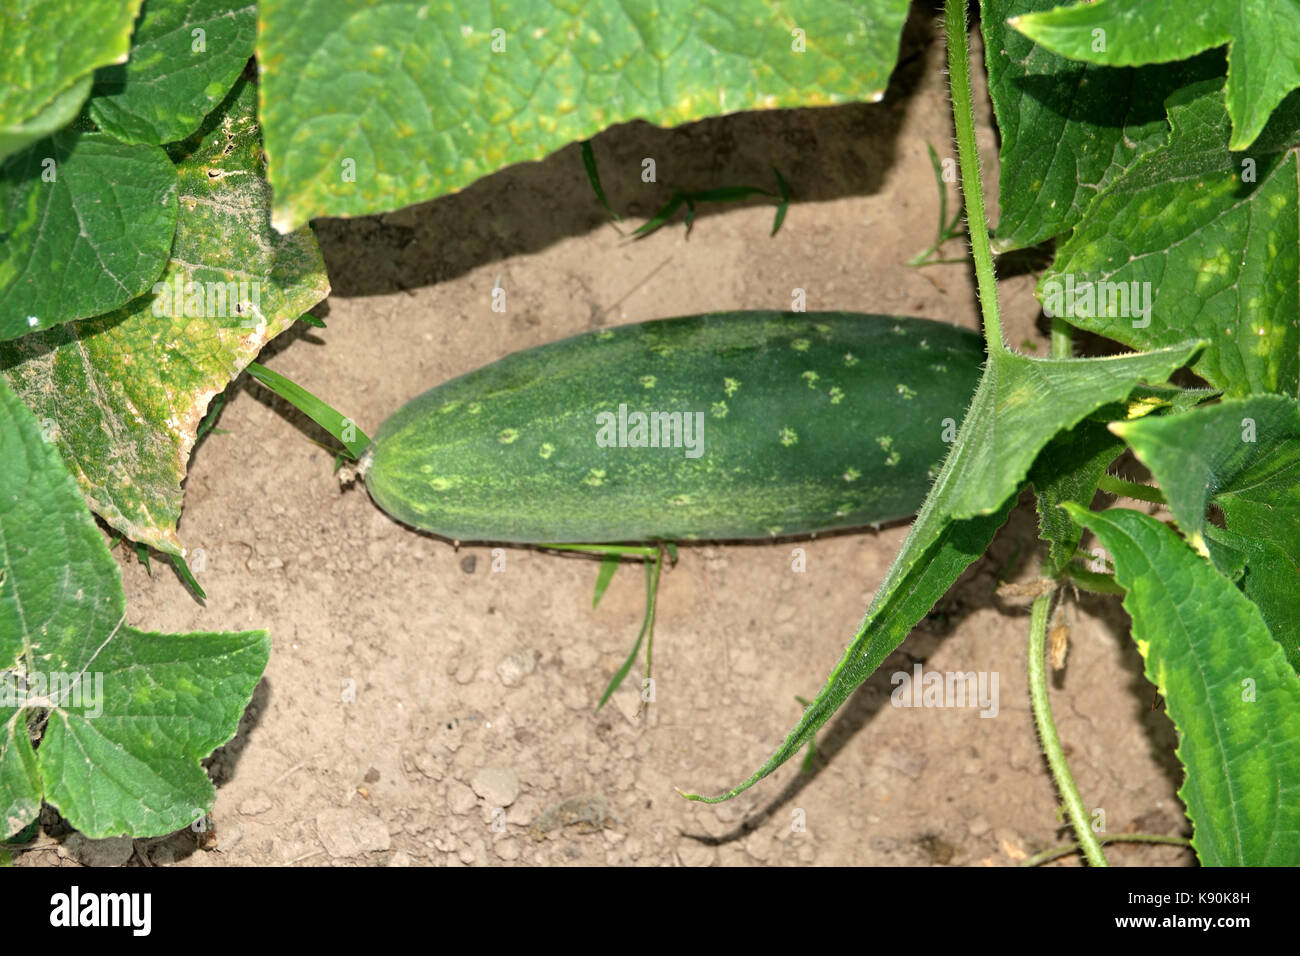 Cucumbers and squash are homegrown and ready to be harvested. Stock Photo